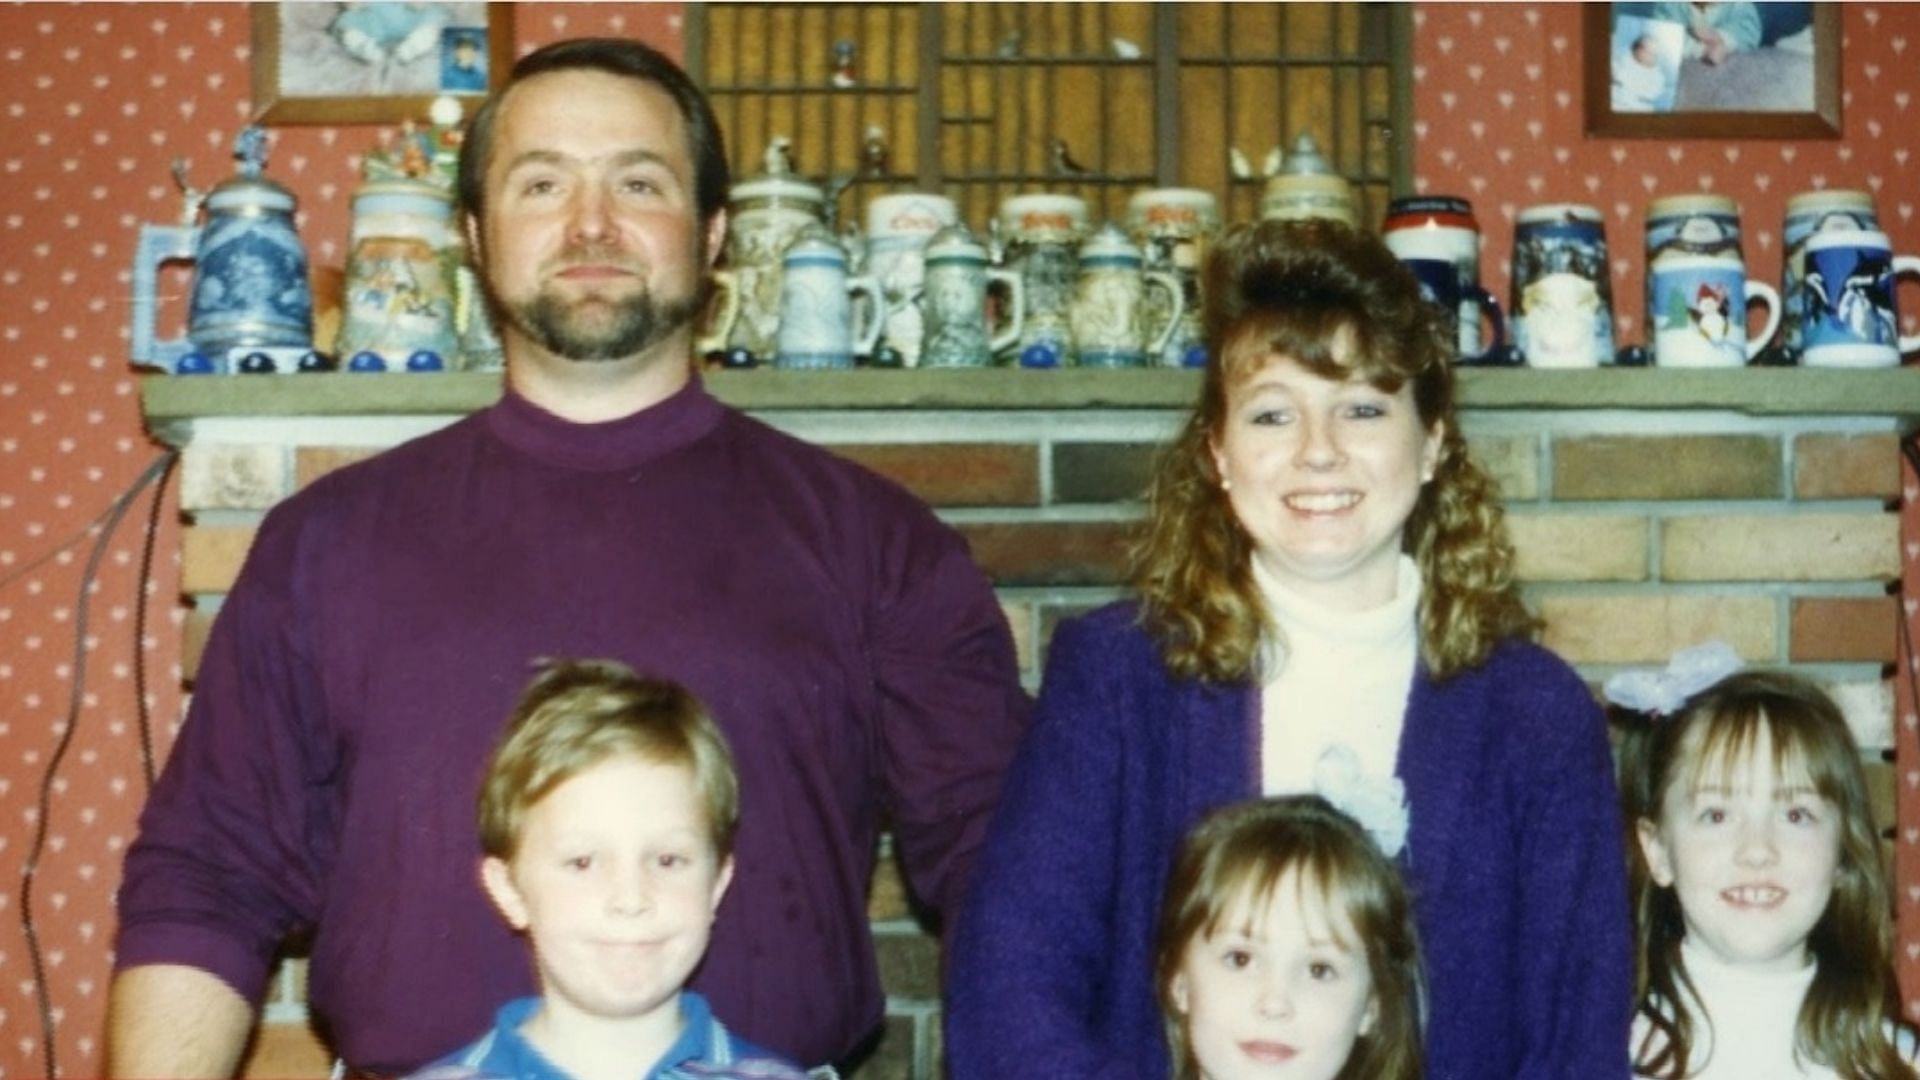 A still of Karl Karlsen and Chistina Karlsen with their family (Image Via YouTube/Google)